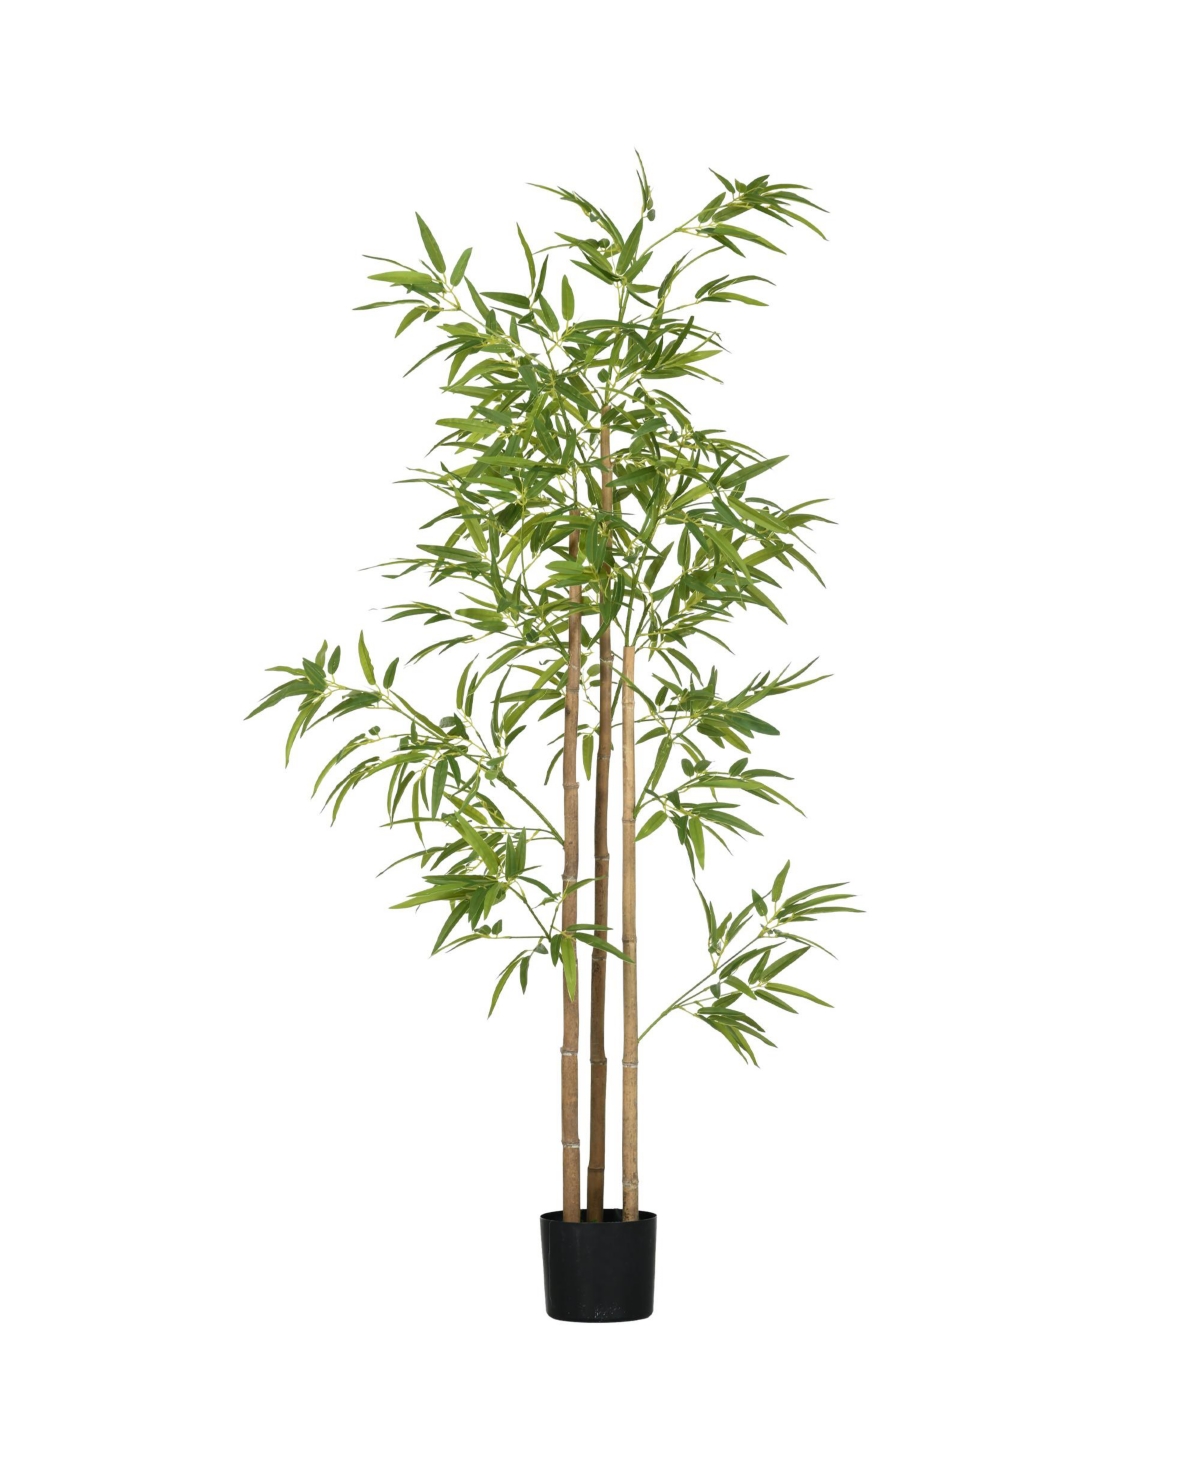 6' Artificial Tree, Pre-Potted Bamboo for Home Decor, Fake Tree - Green